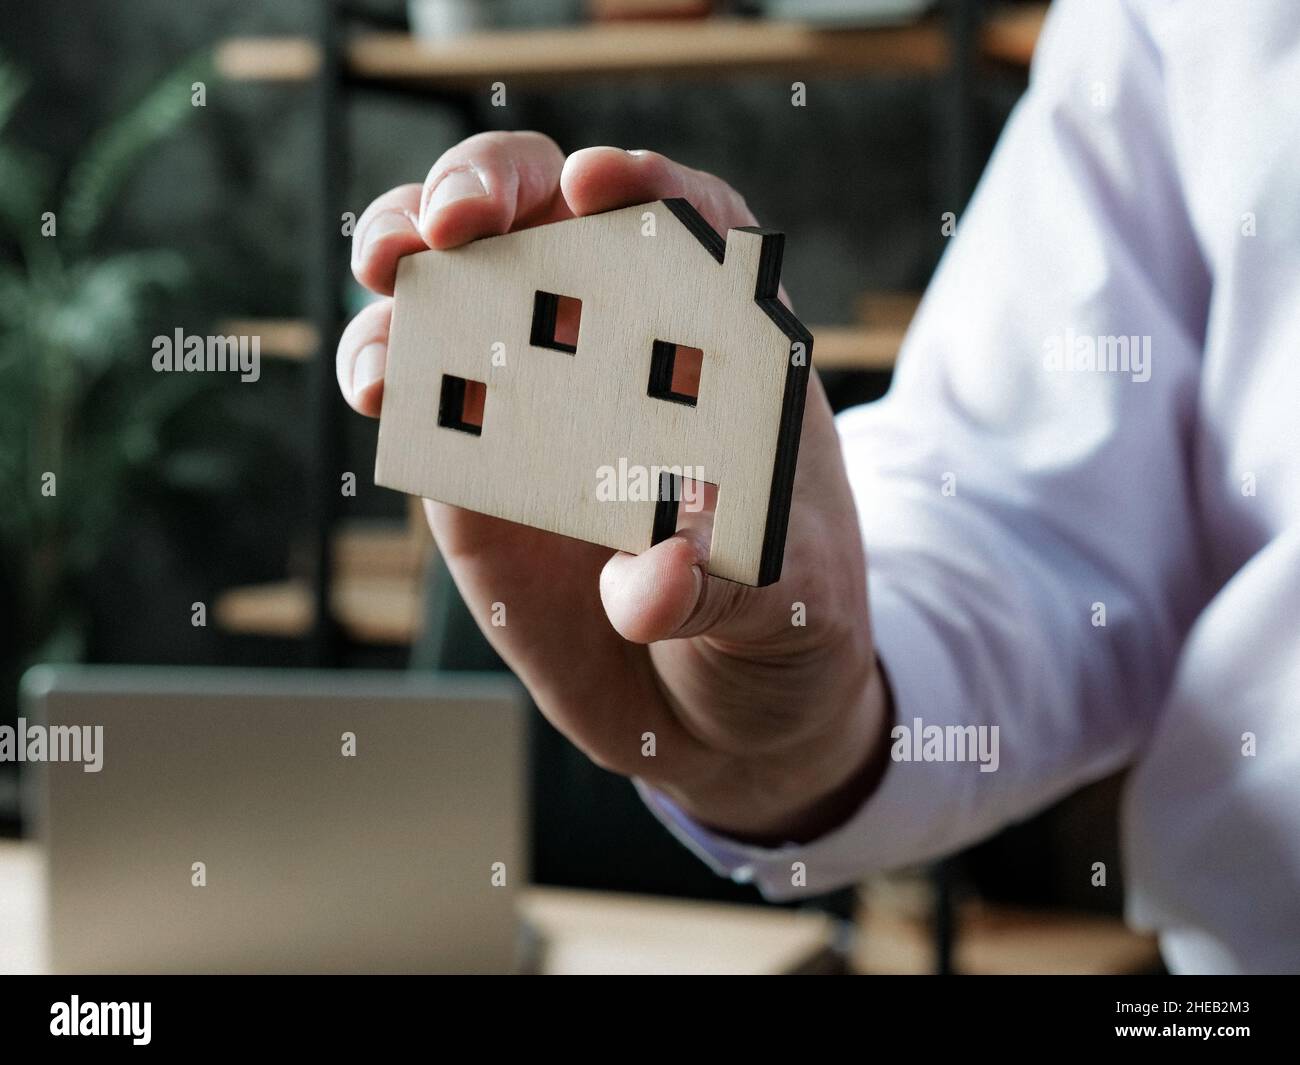 Mortgage or buying house concept. Manager shows model of home. Stock Photo